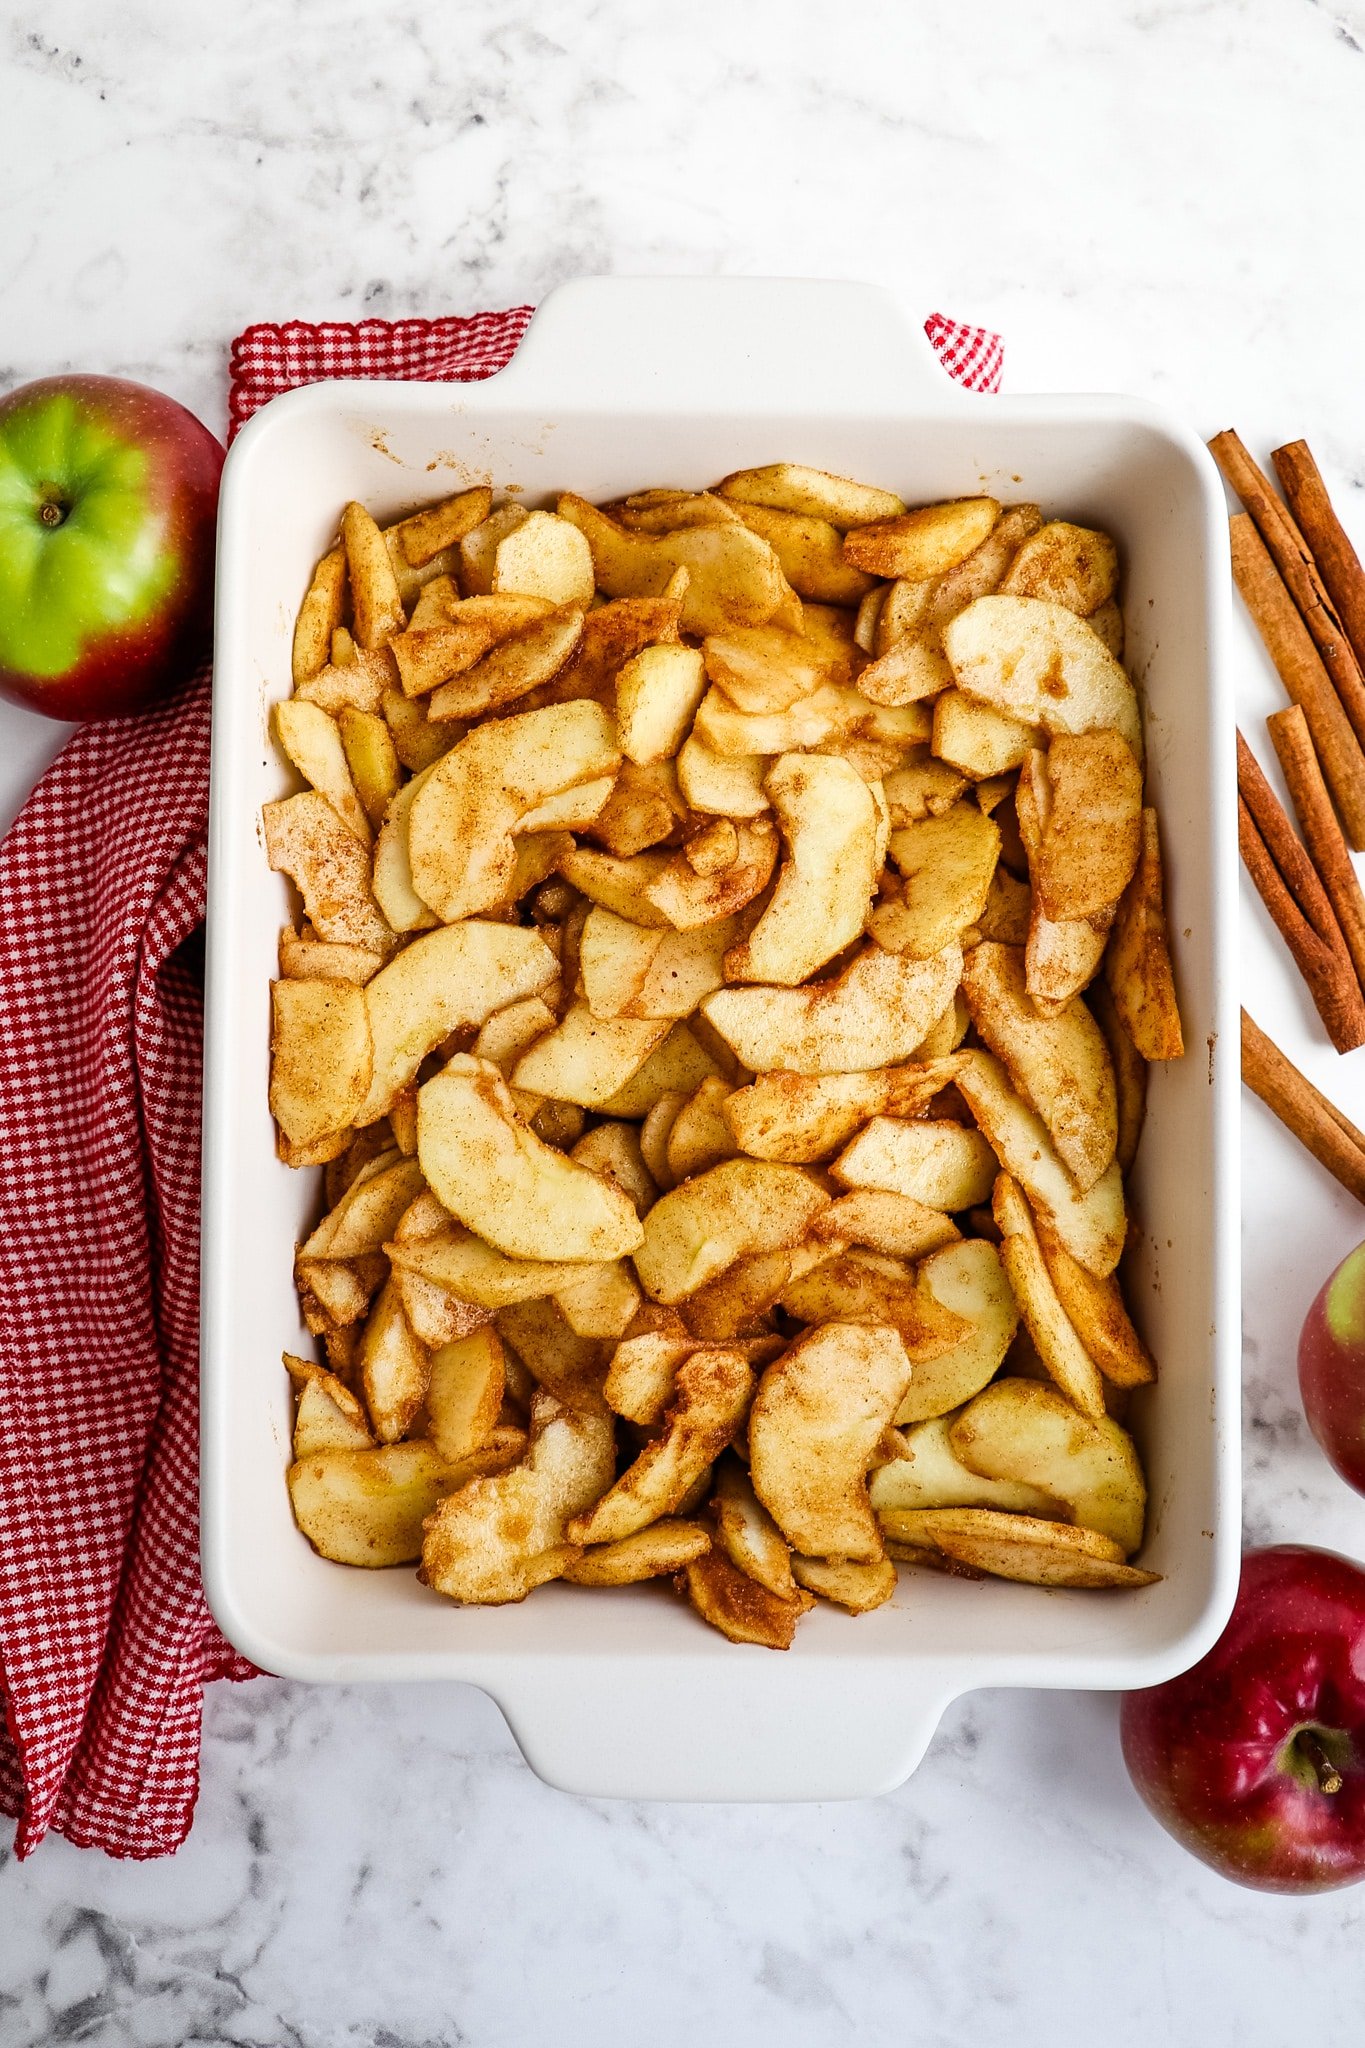 Sliced apples coated in brown sugar and cinnamon in baking dish.